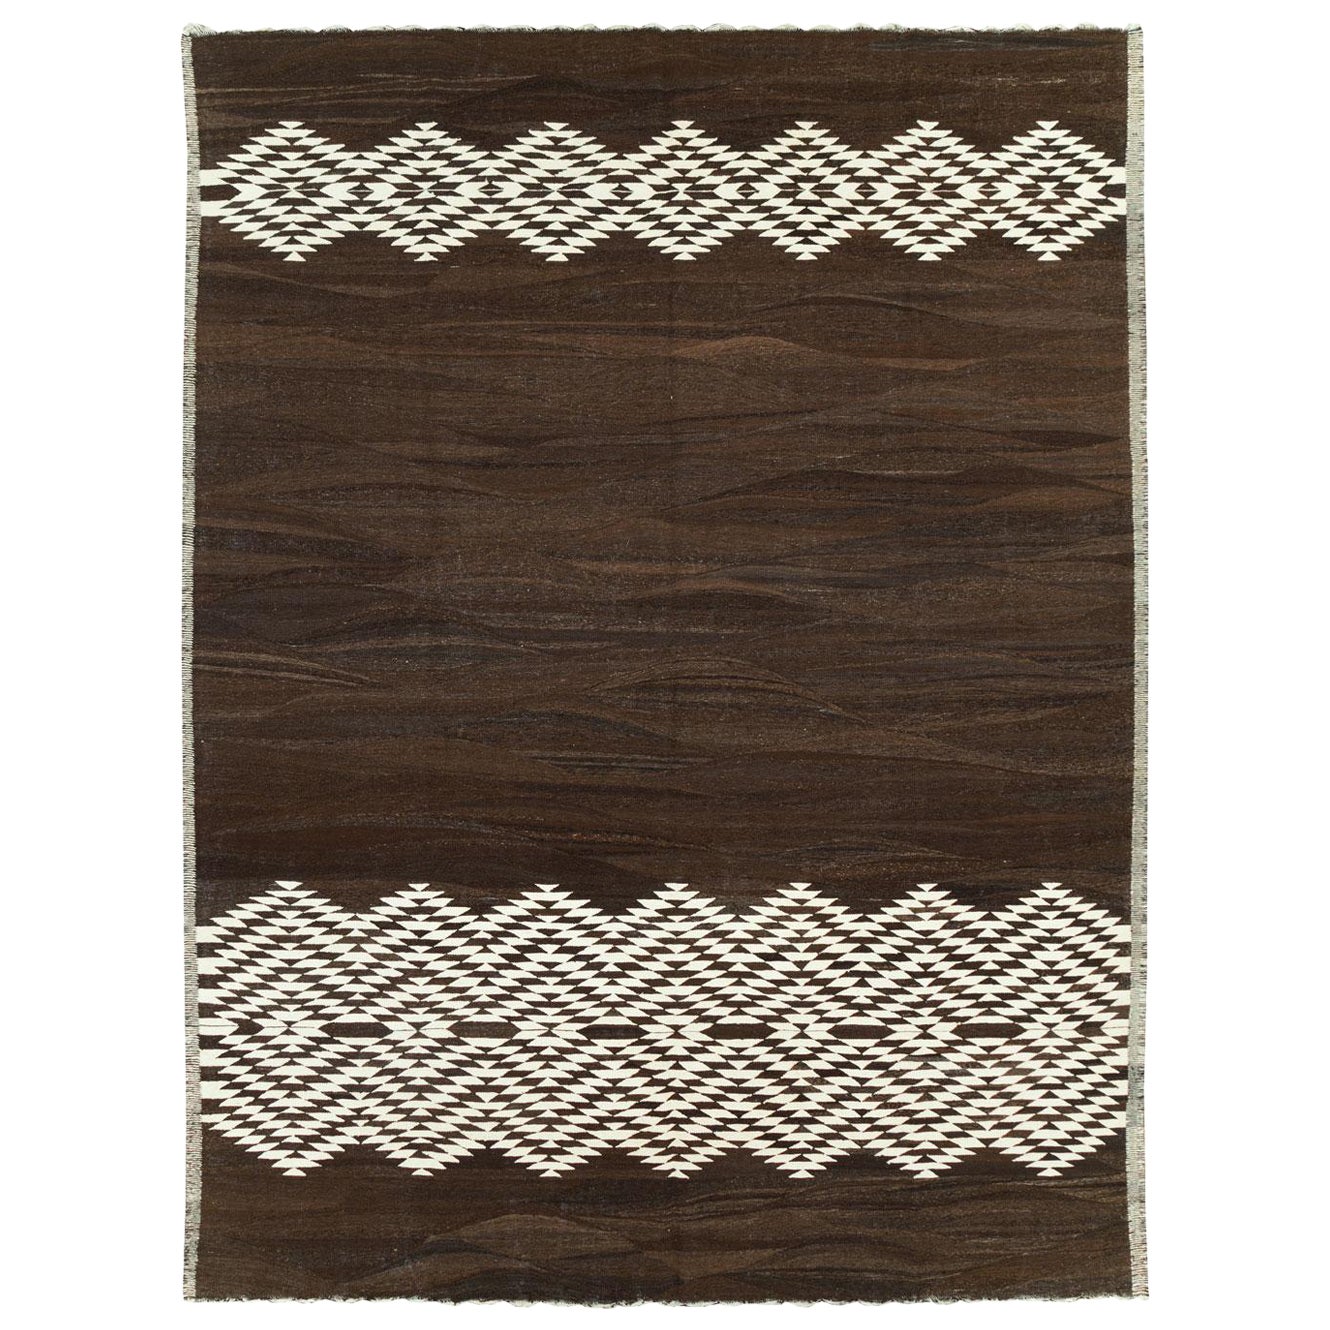 Contemporary Turkish Flatweave Kilim Room Size Carpet in Cream and Dark Brown For Sale